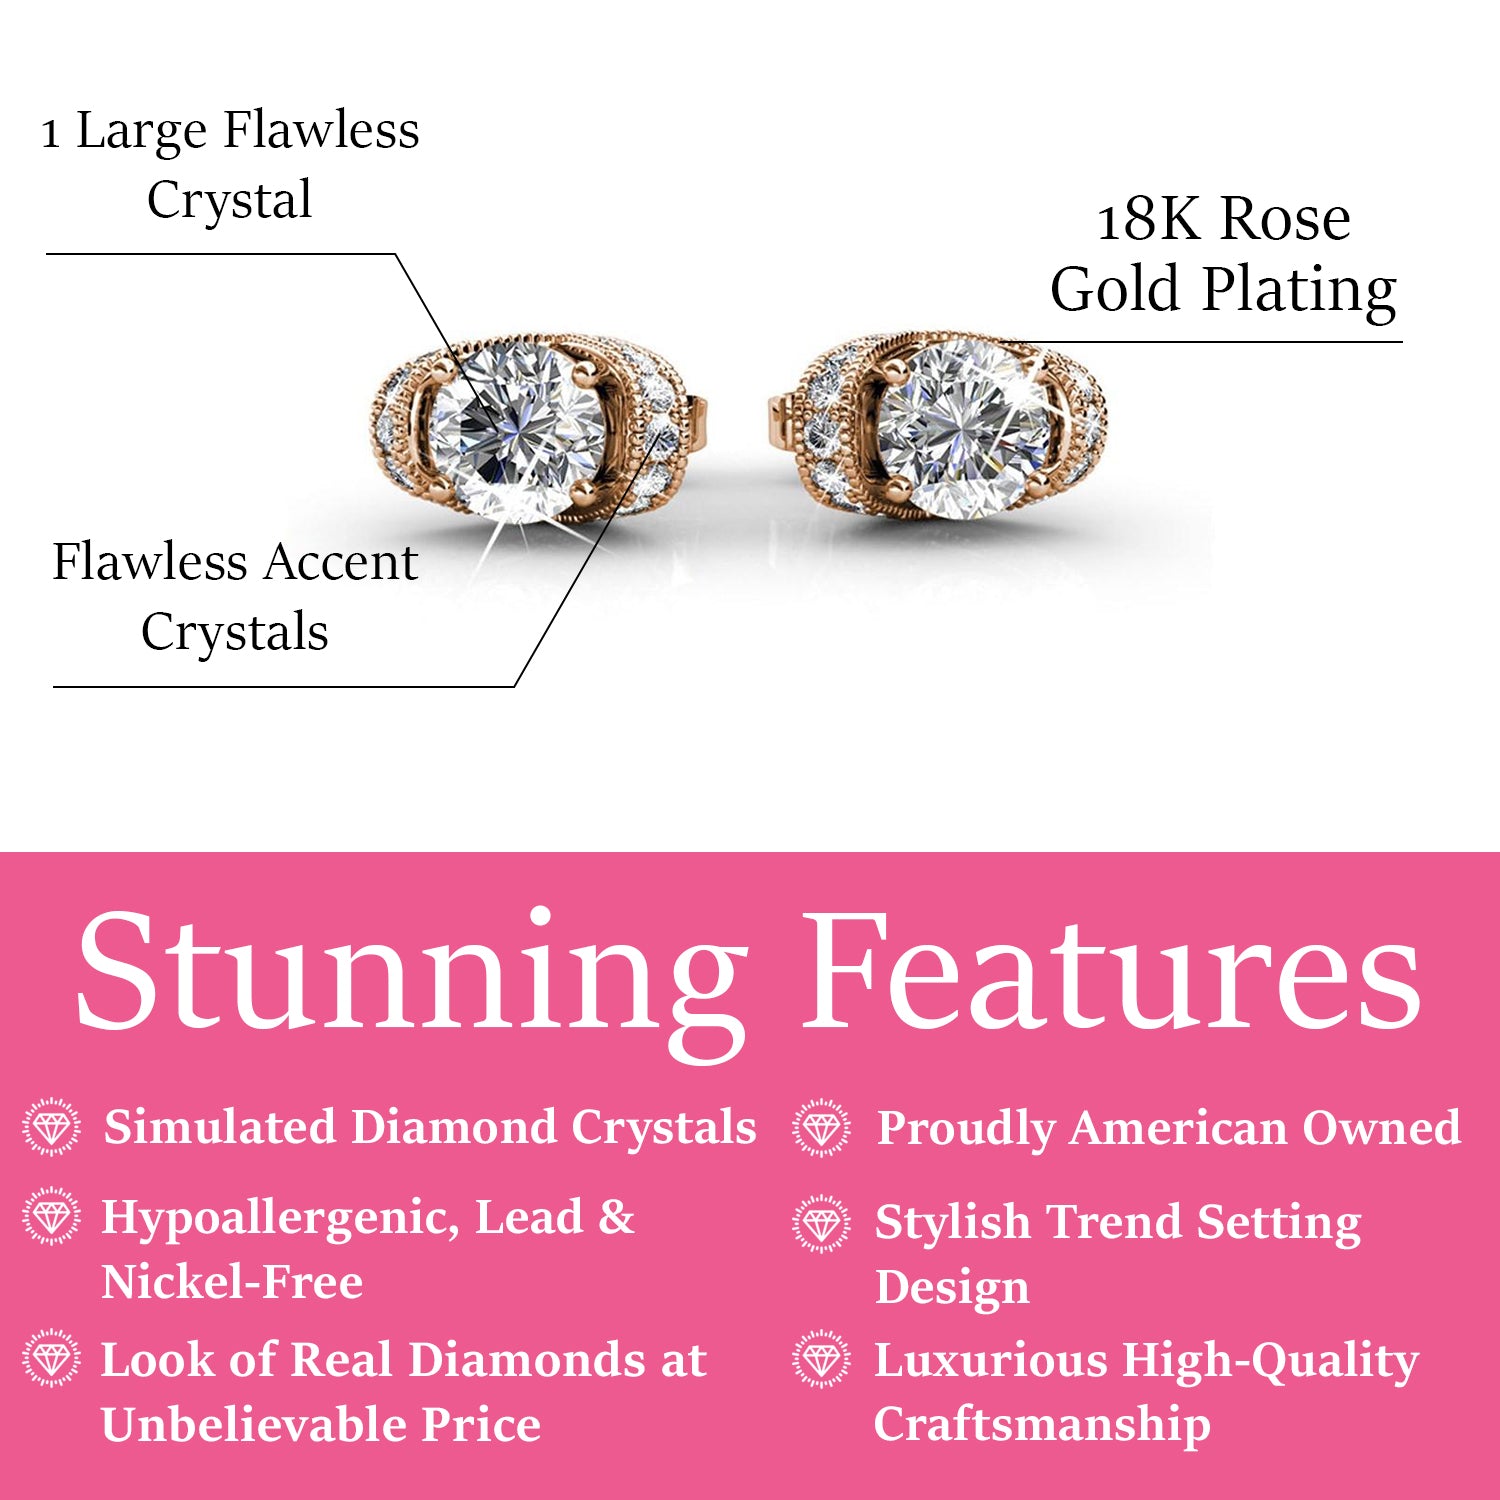 Astrid 18k White Gold Plated Stud Earrings with Simulated Diamond Crystals